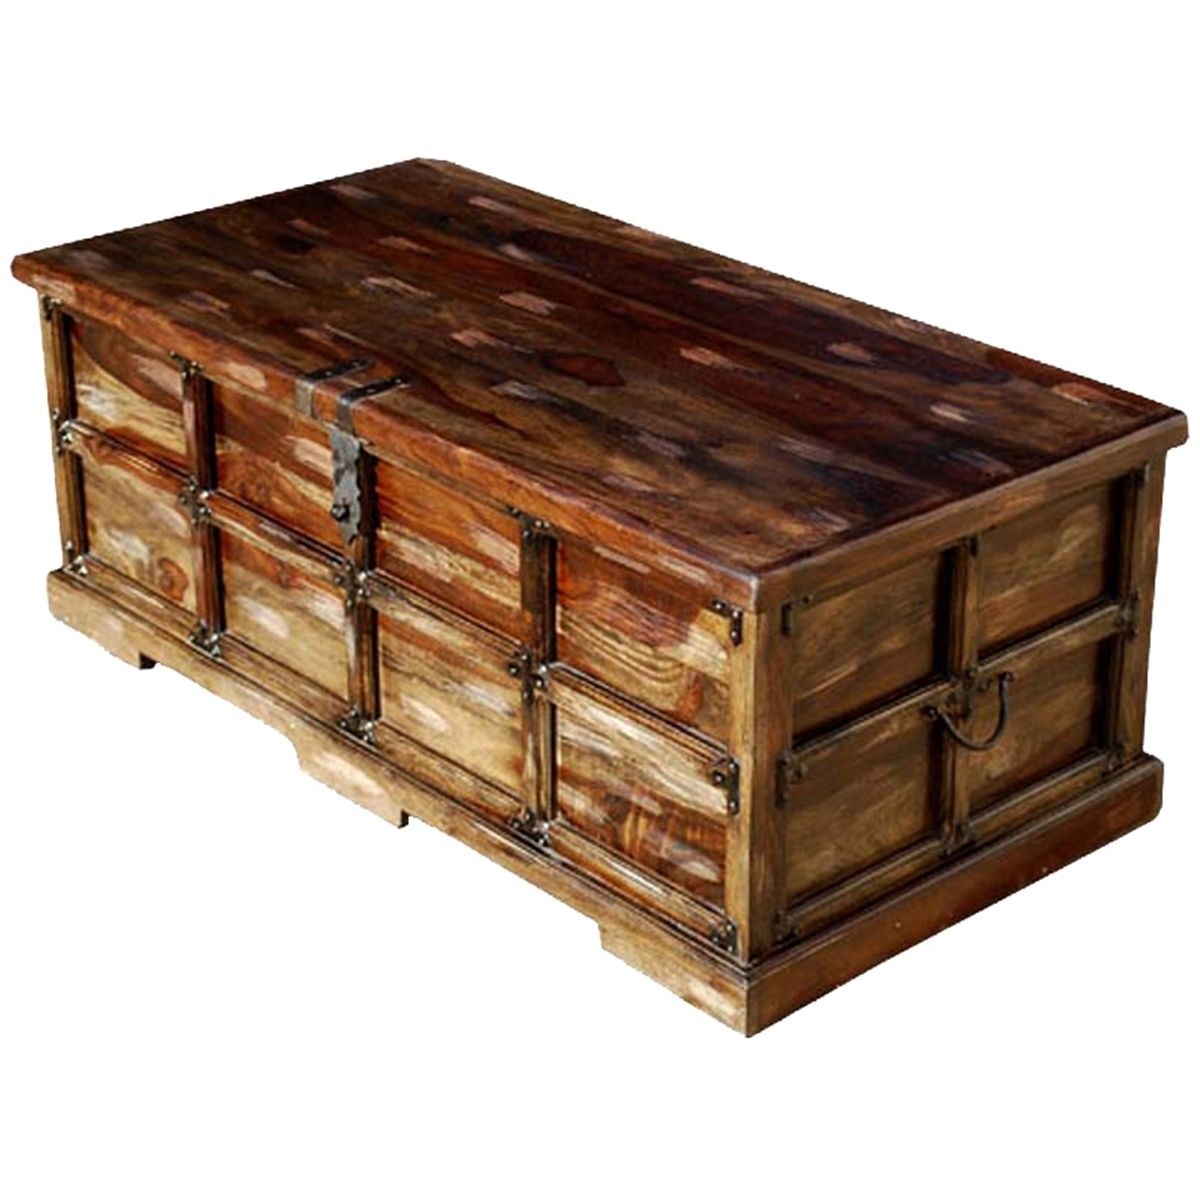 Unique Steamer Style Storage Trunk Coffee Table Chest W Wrought Iron Hardware